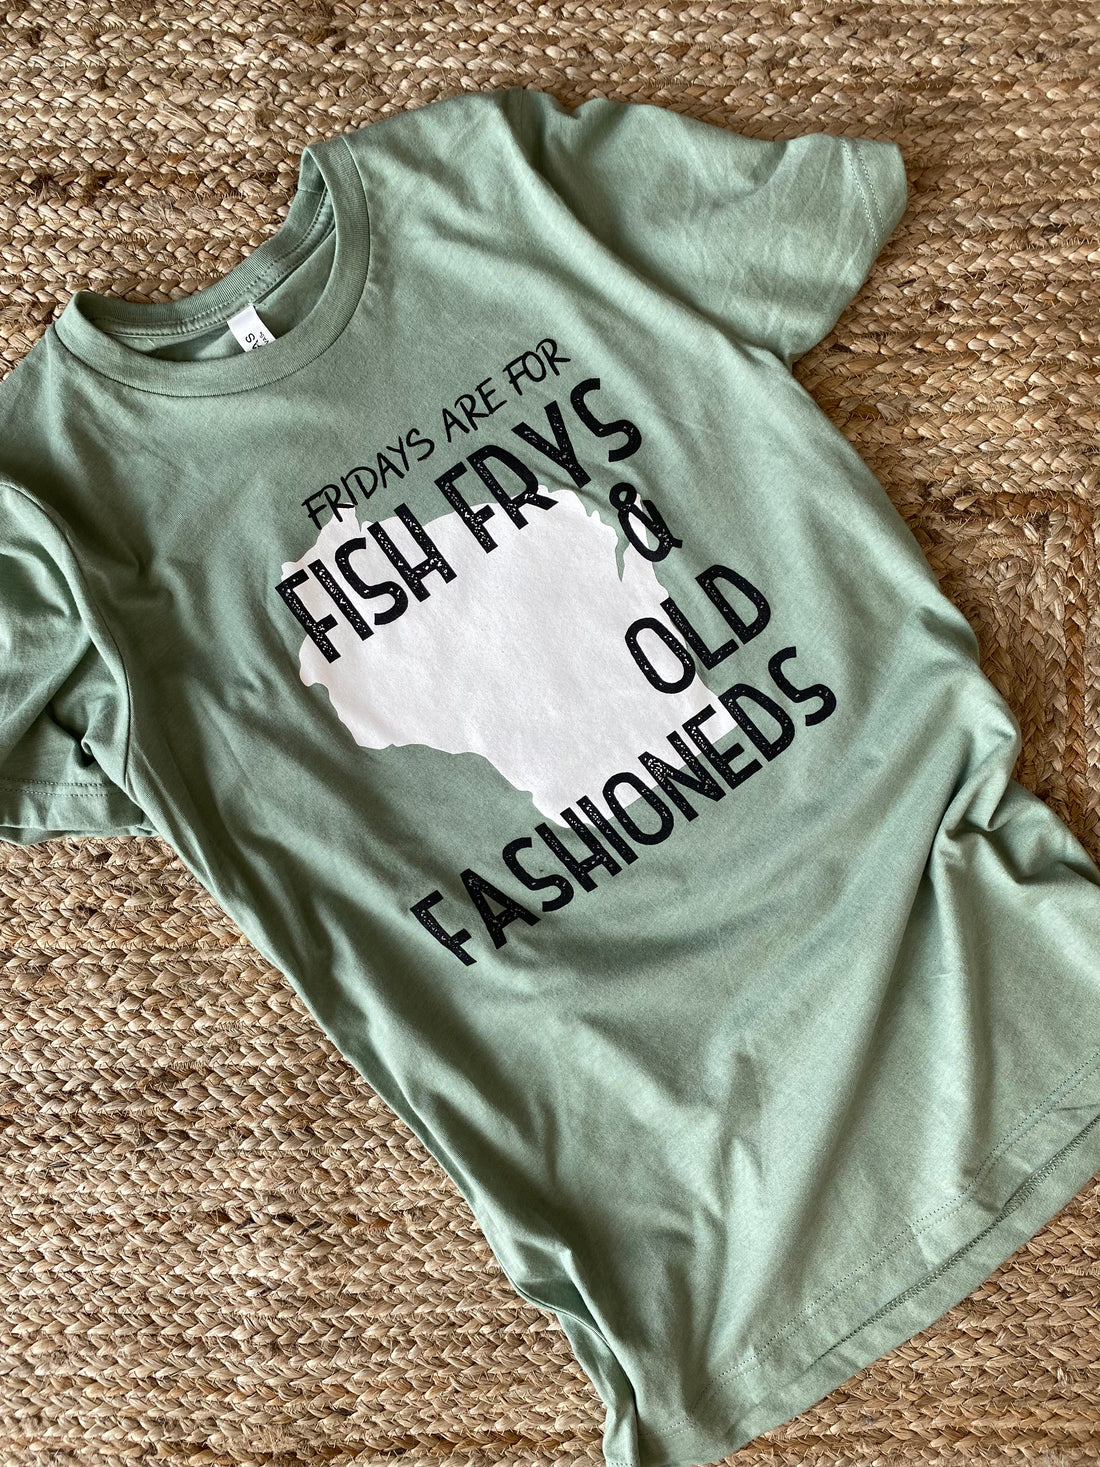 Fridays are for Fish Frys and Old Fashioneds Sage Tee